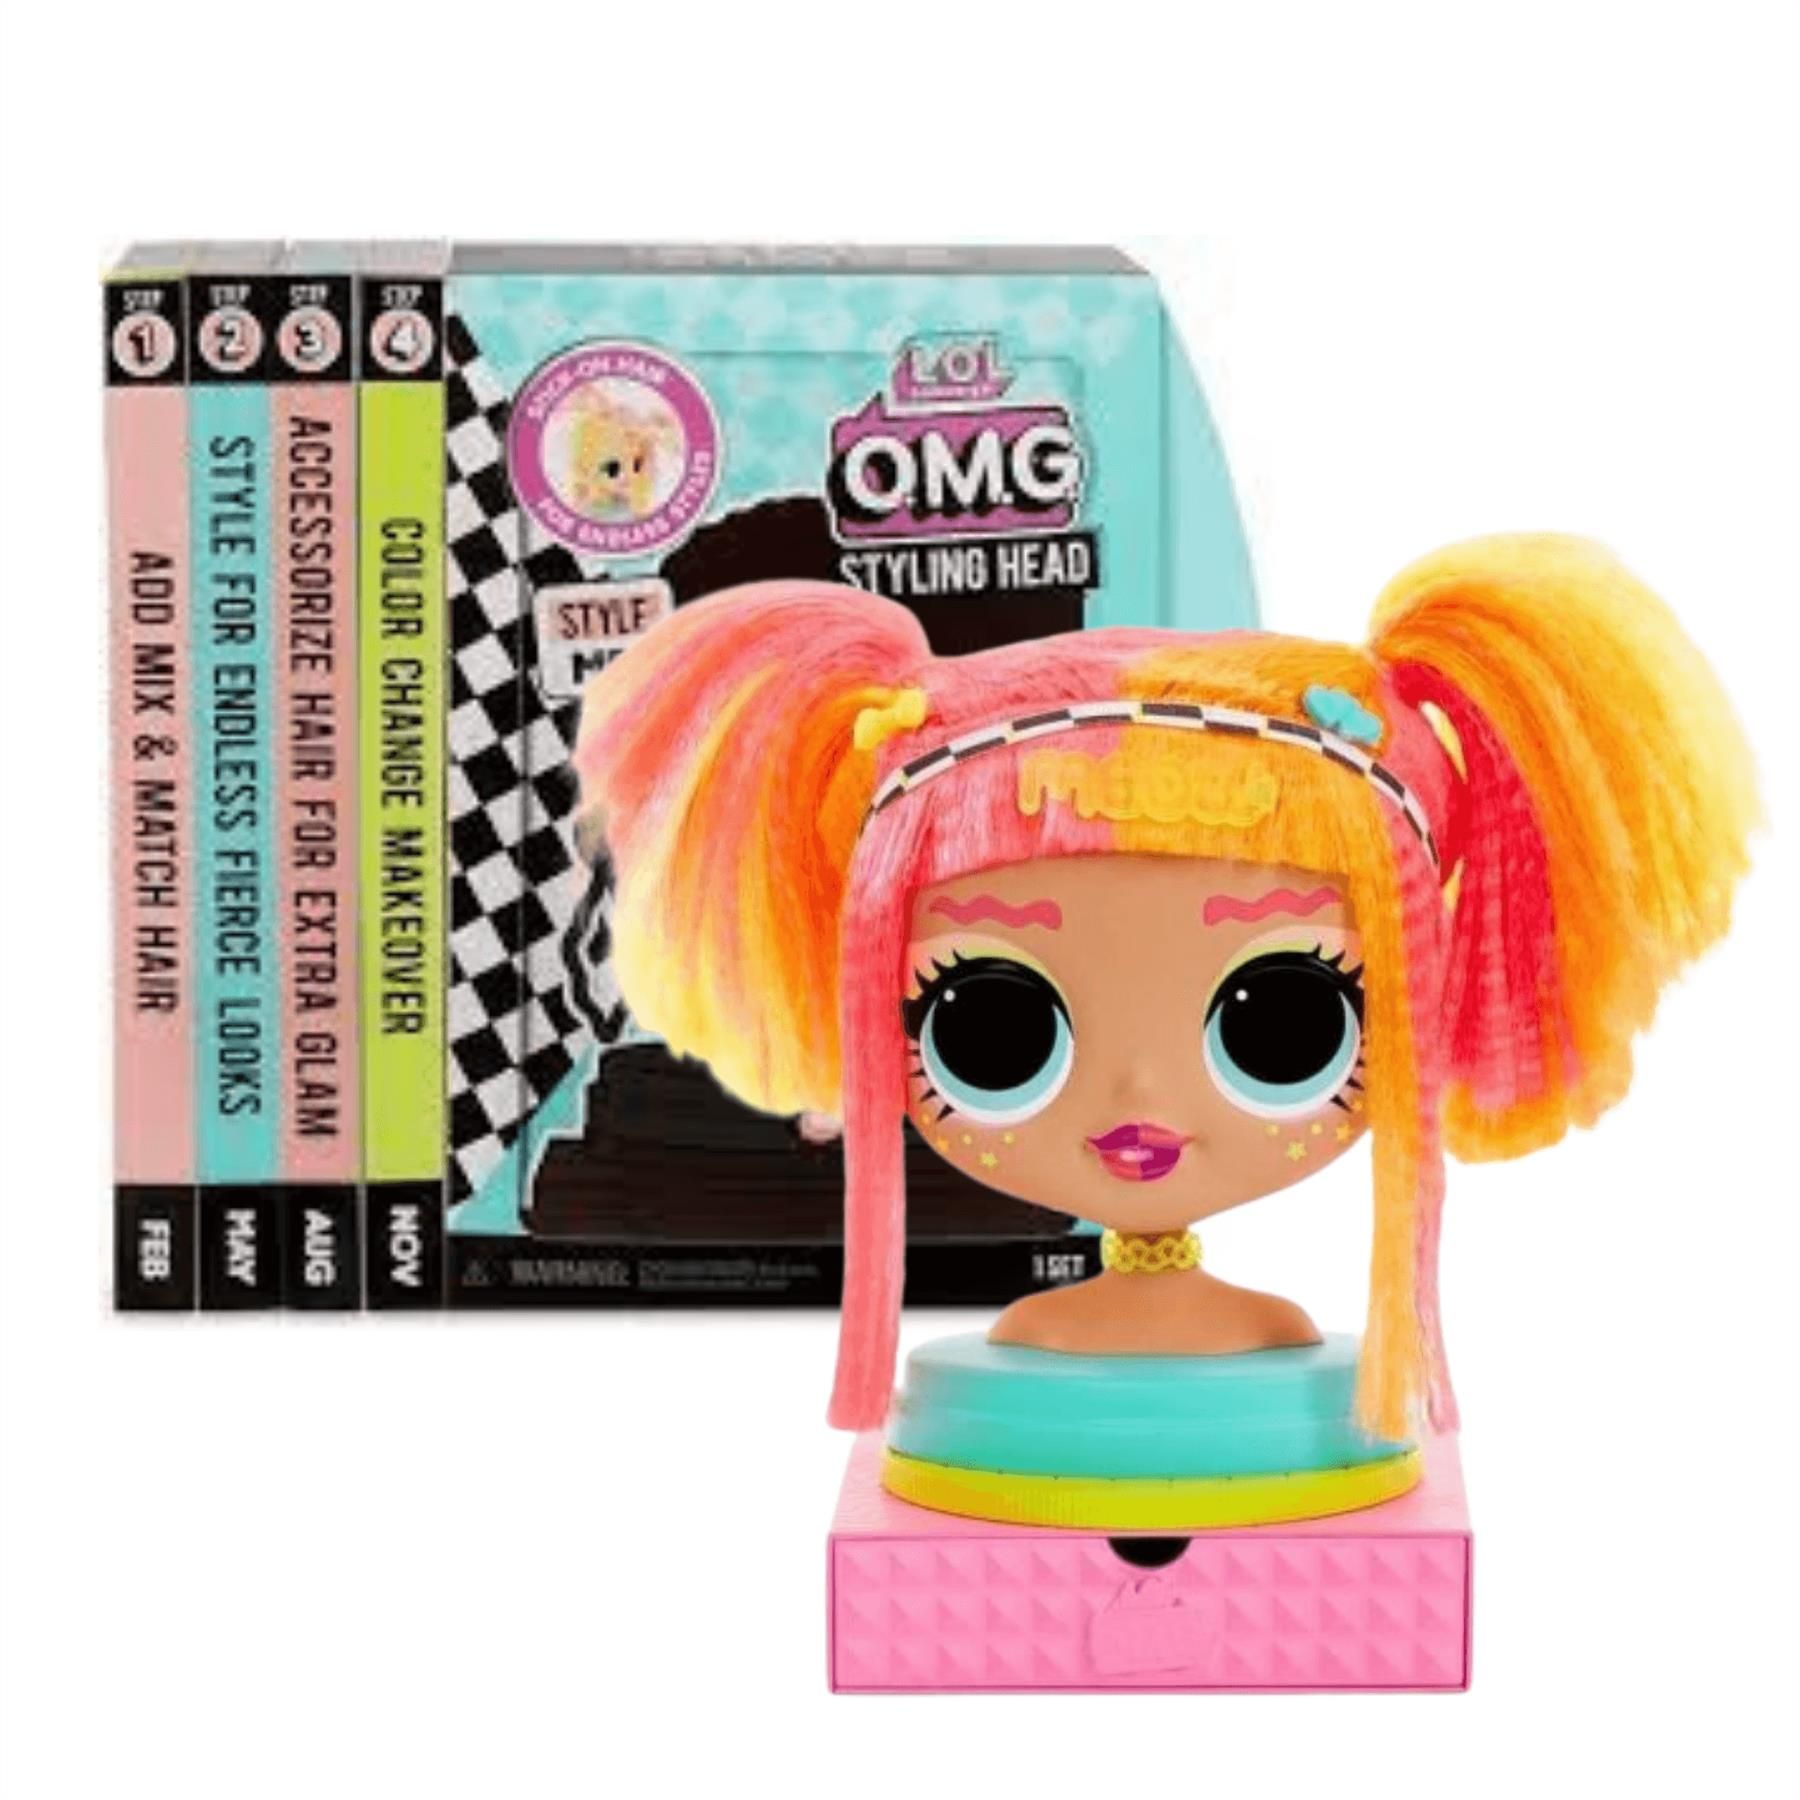 Buy . Surprise! . Neonlicious Styling Doll Head at BargainMax |  Free Delivery over £ and Buy Now, Pay Later with Klarna, ClearPay &  Laybuy | Bargain Max